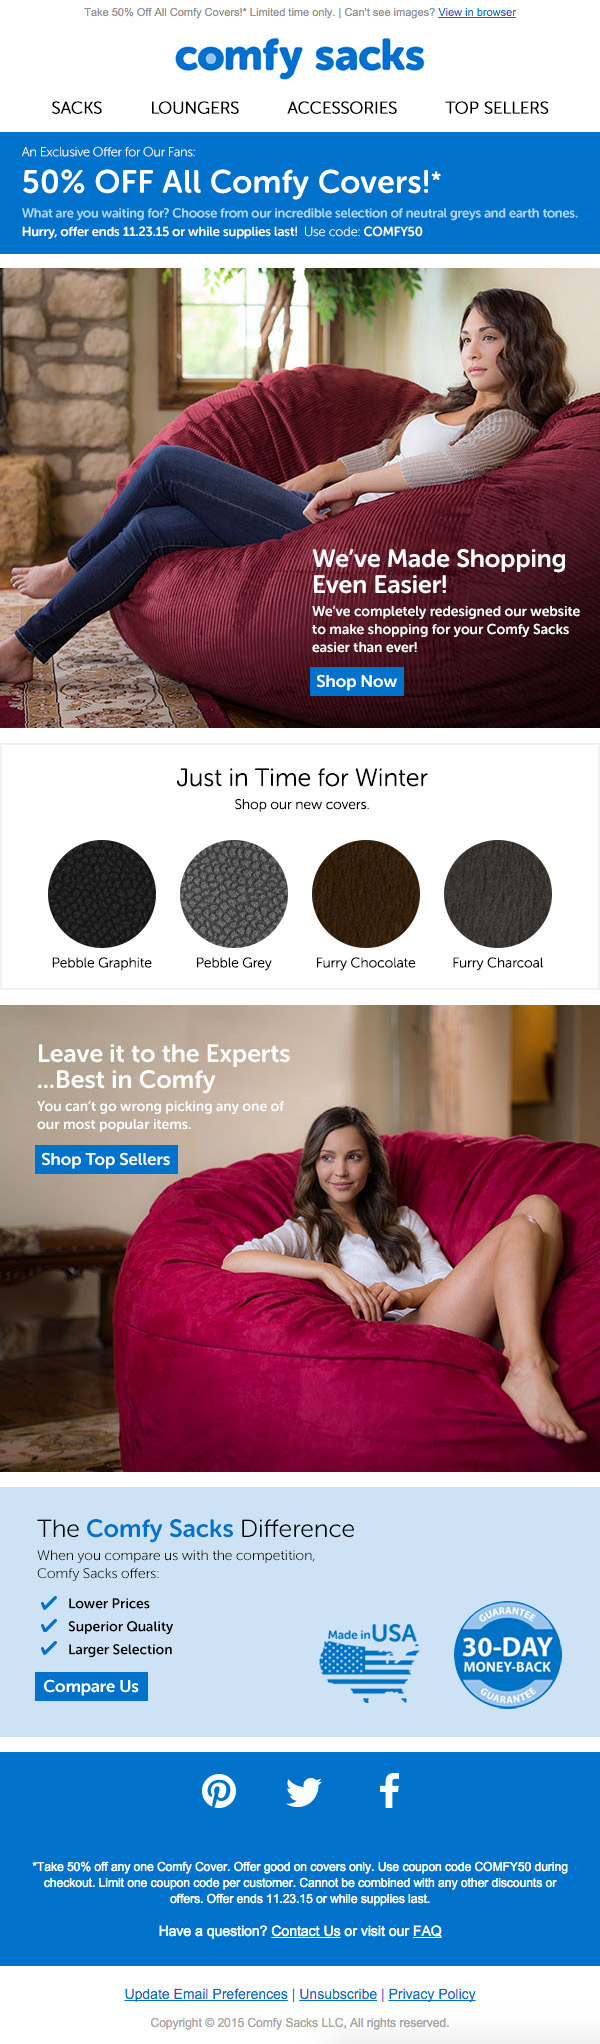 Email Newsletters Bean Bag chairs Comfy Sacks